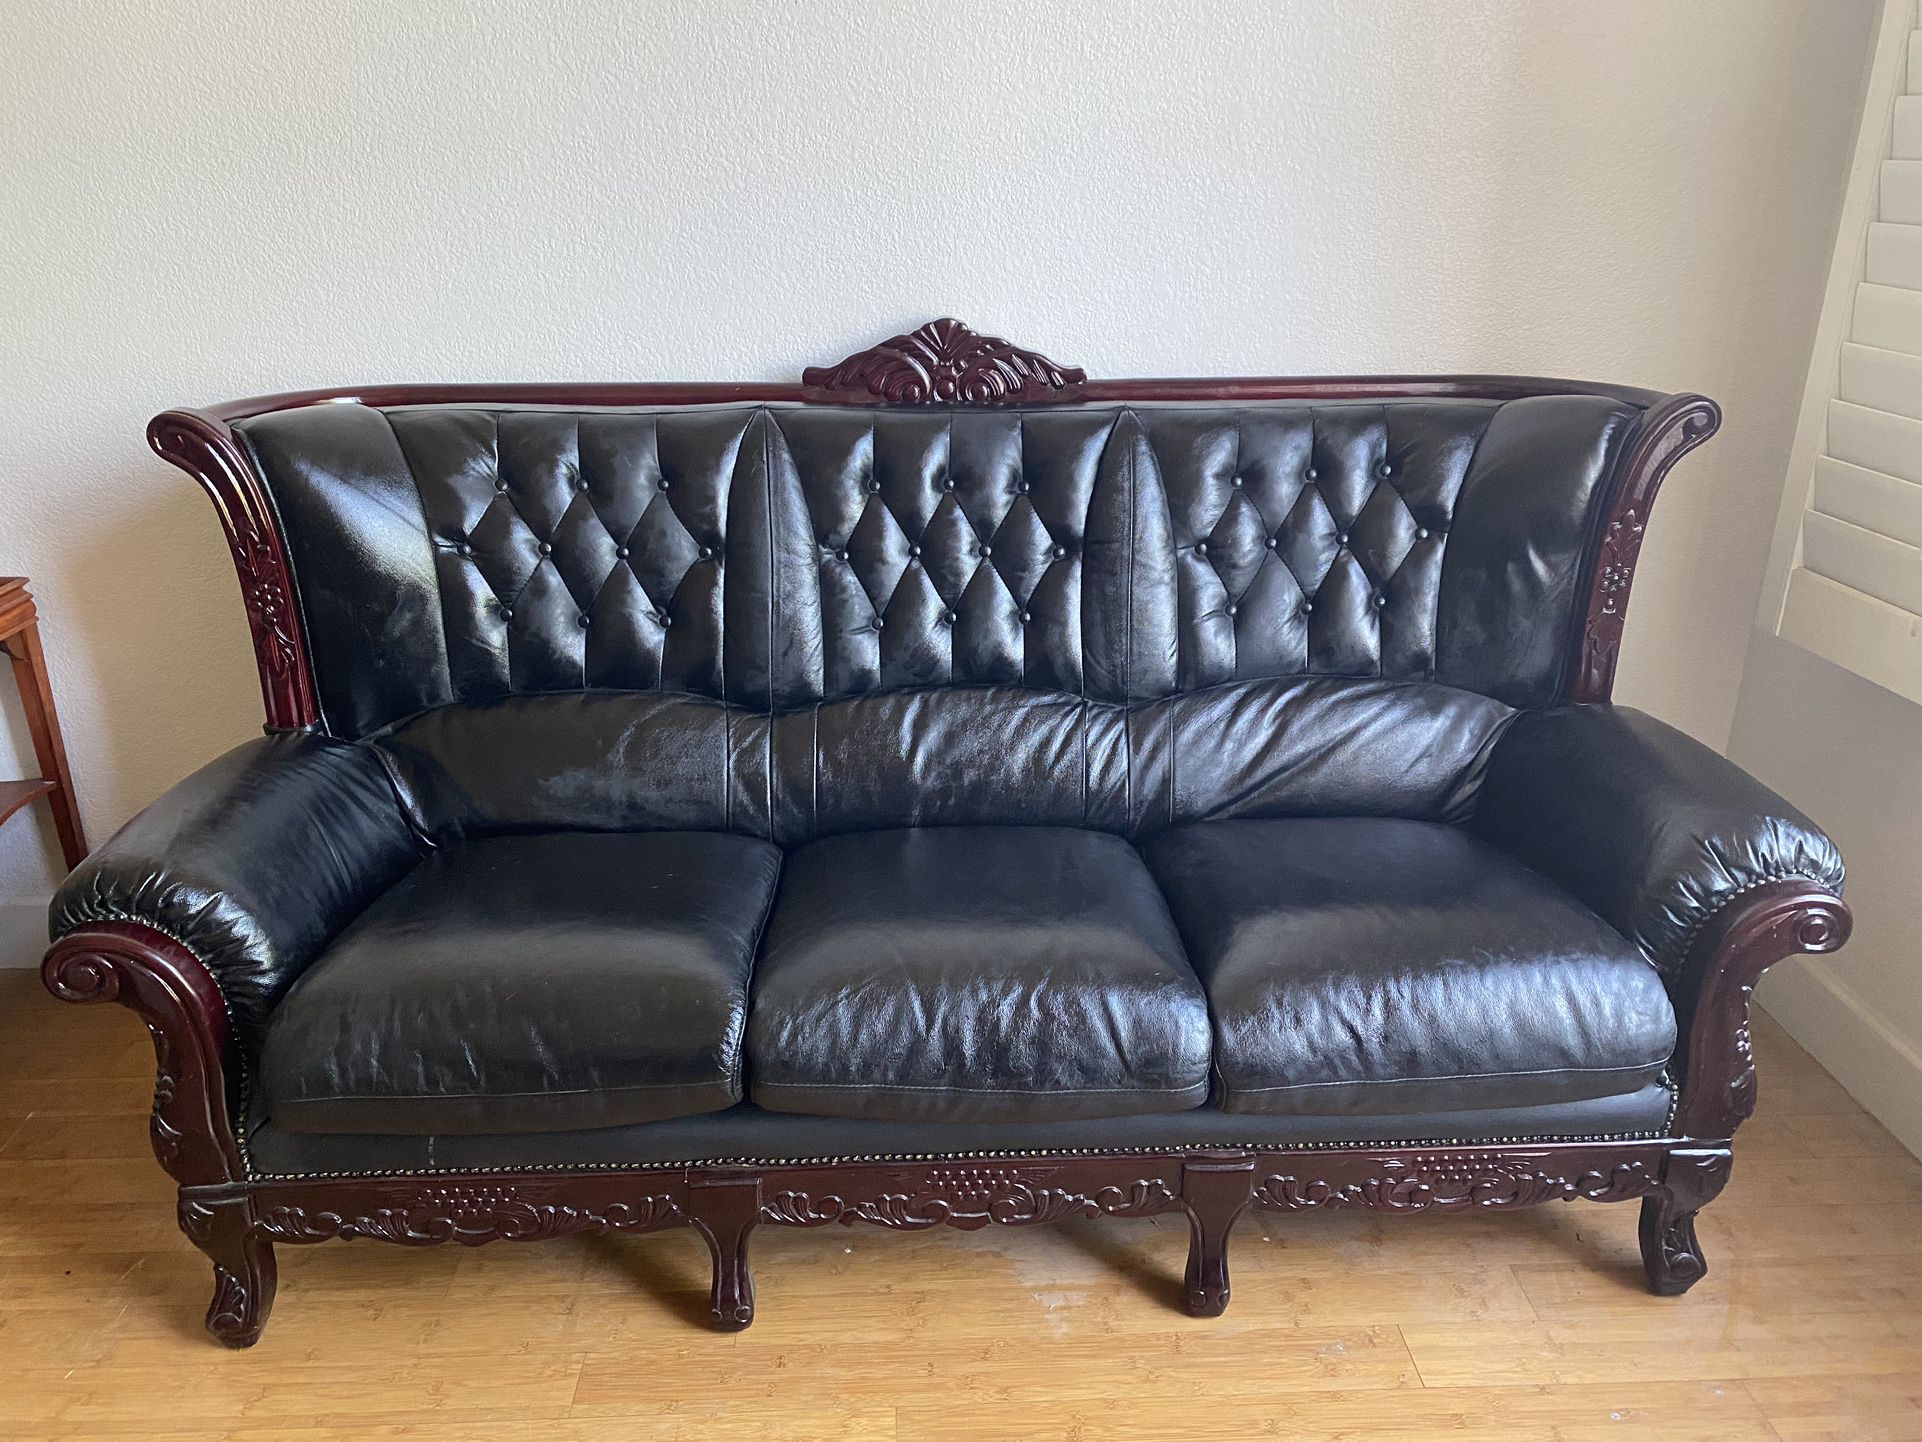 Pick 2 For $800 Black Leather Sofa Set With Mahogany Wood Trim-Gently Used